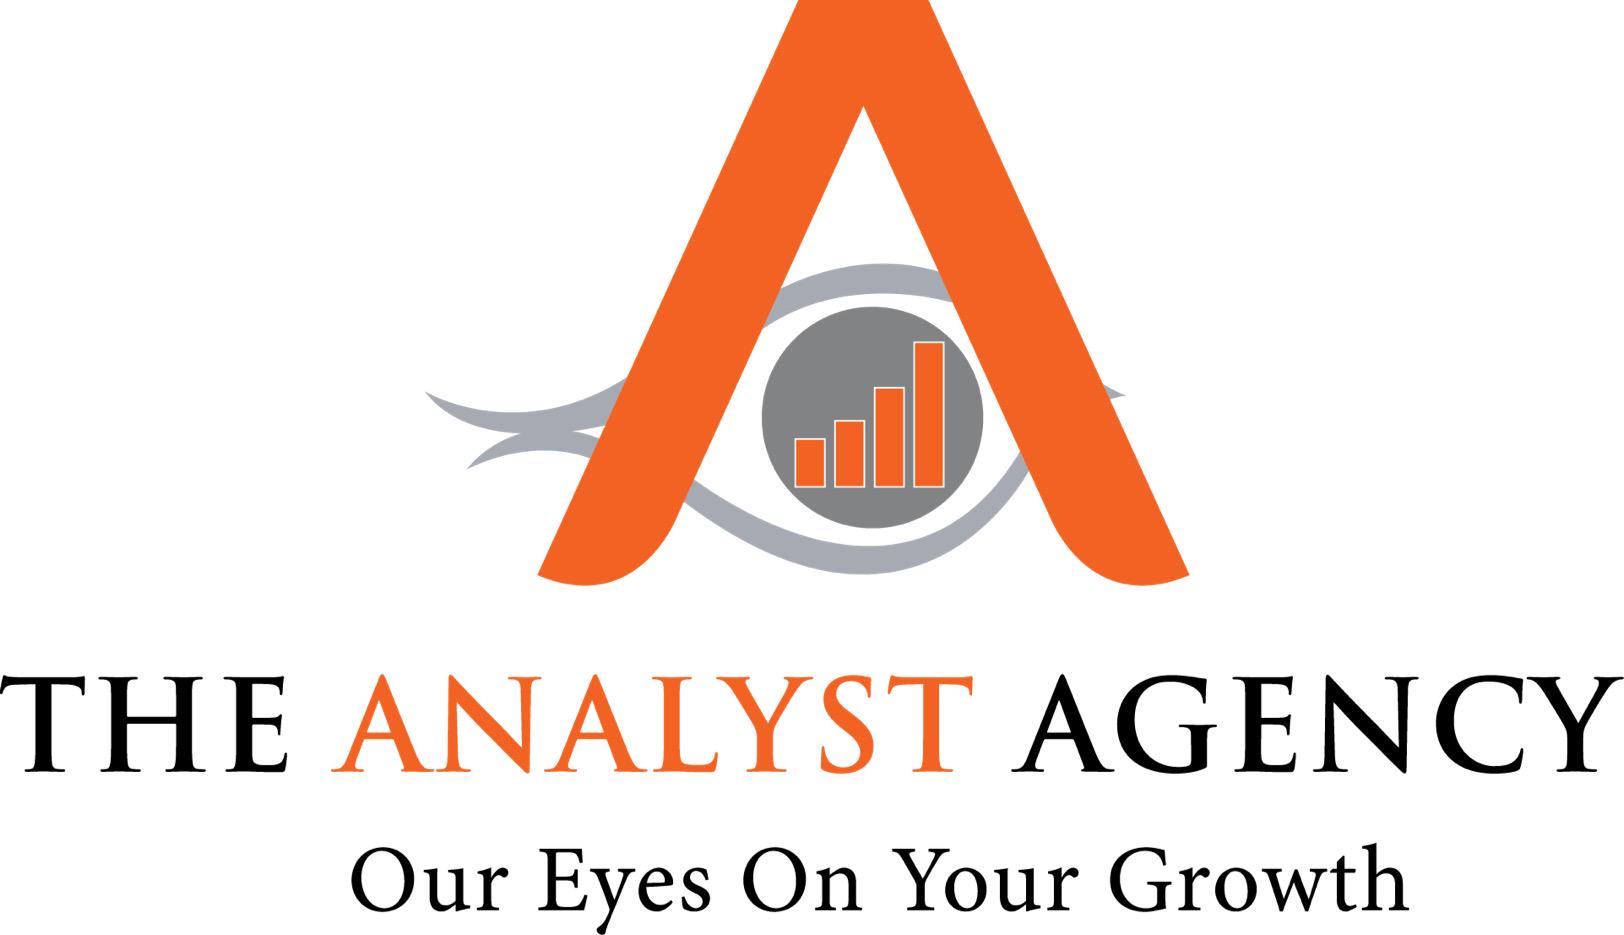 The Analyst Agency, LLC profile on Qualified.One